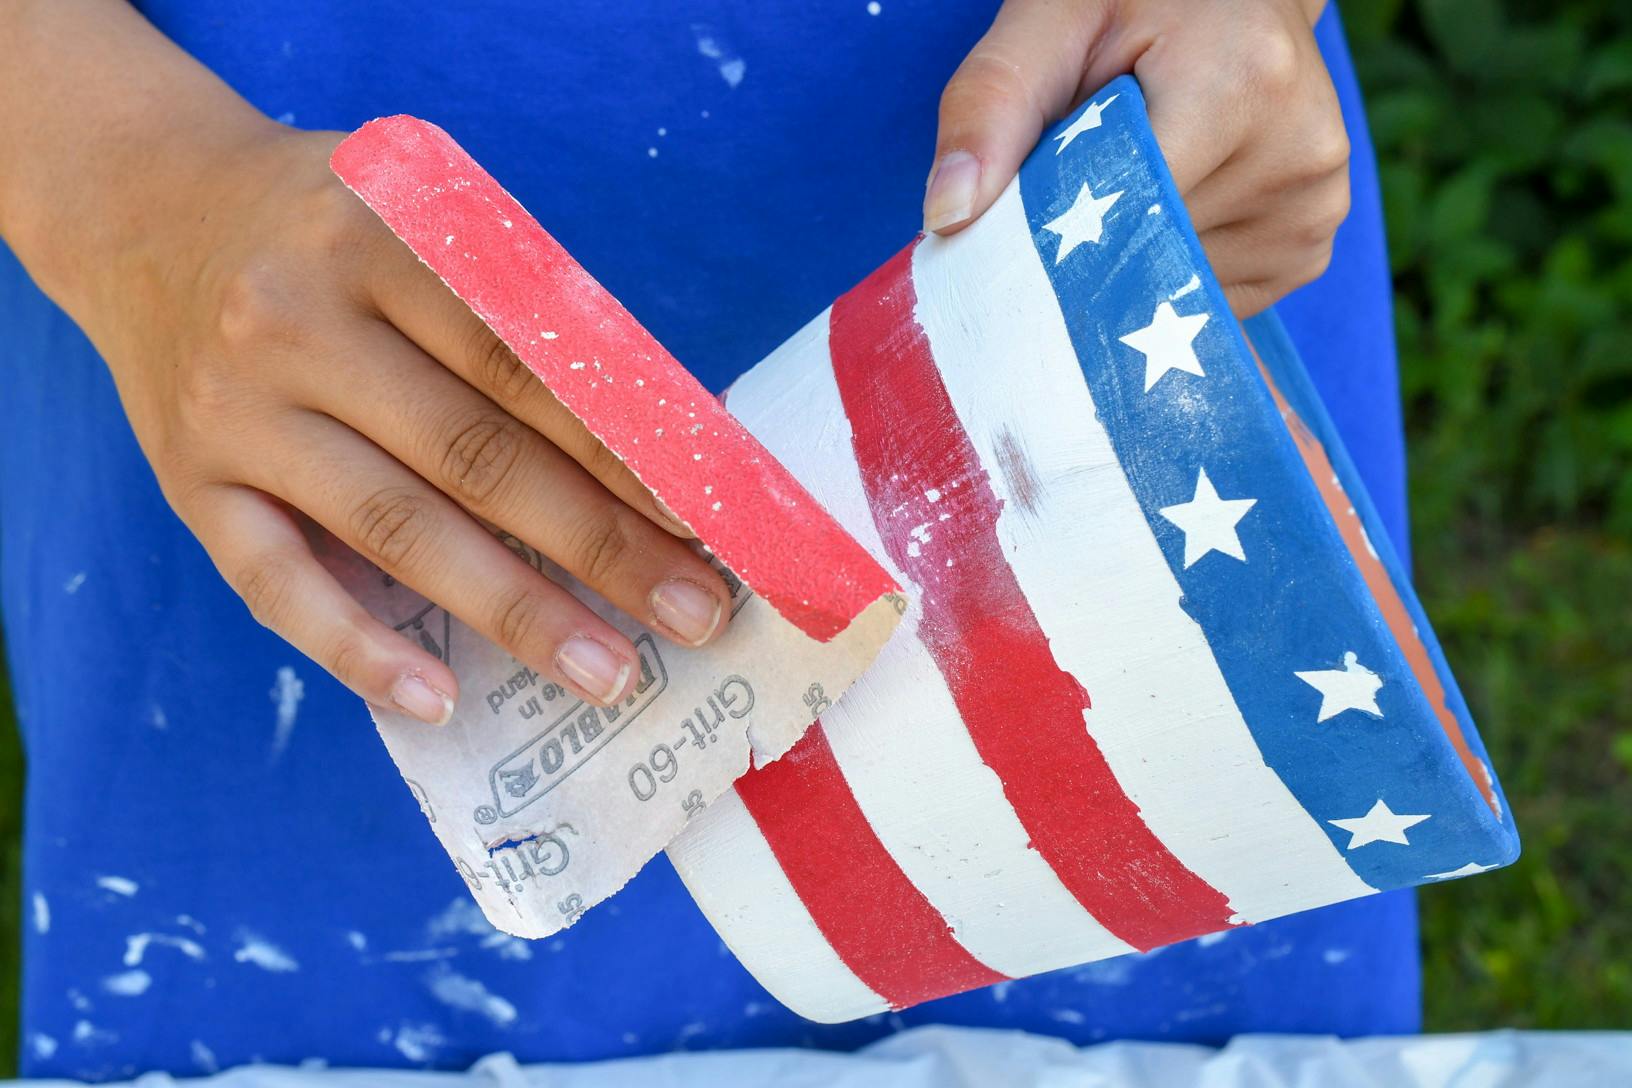 A person lightly sanding a terracotta pot that has been painted to look like an American flag.